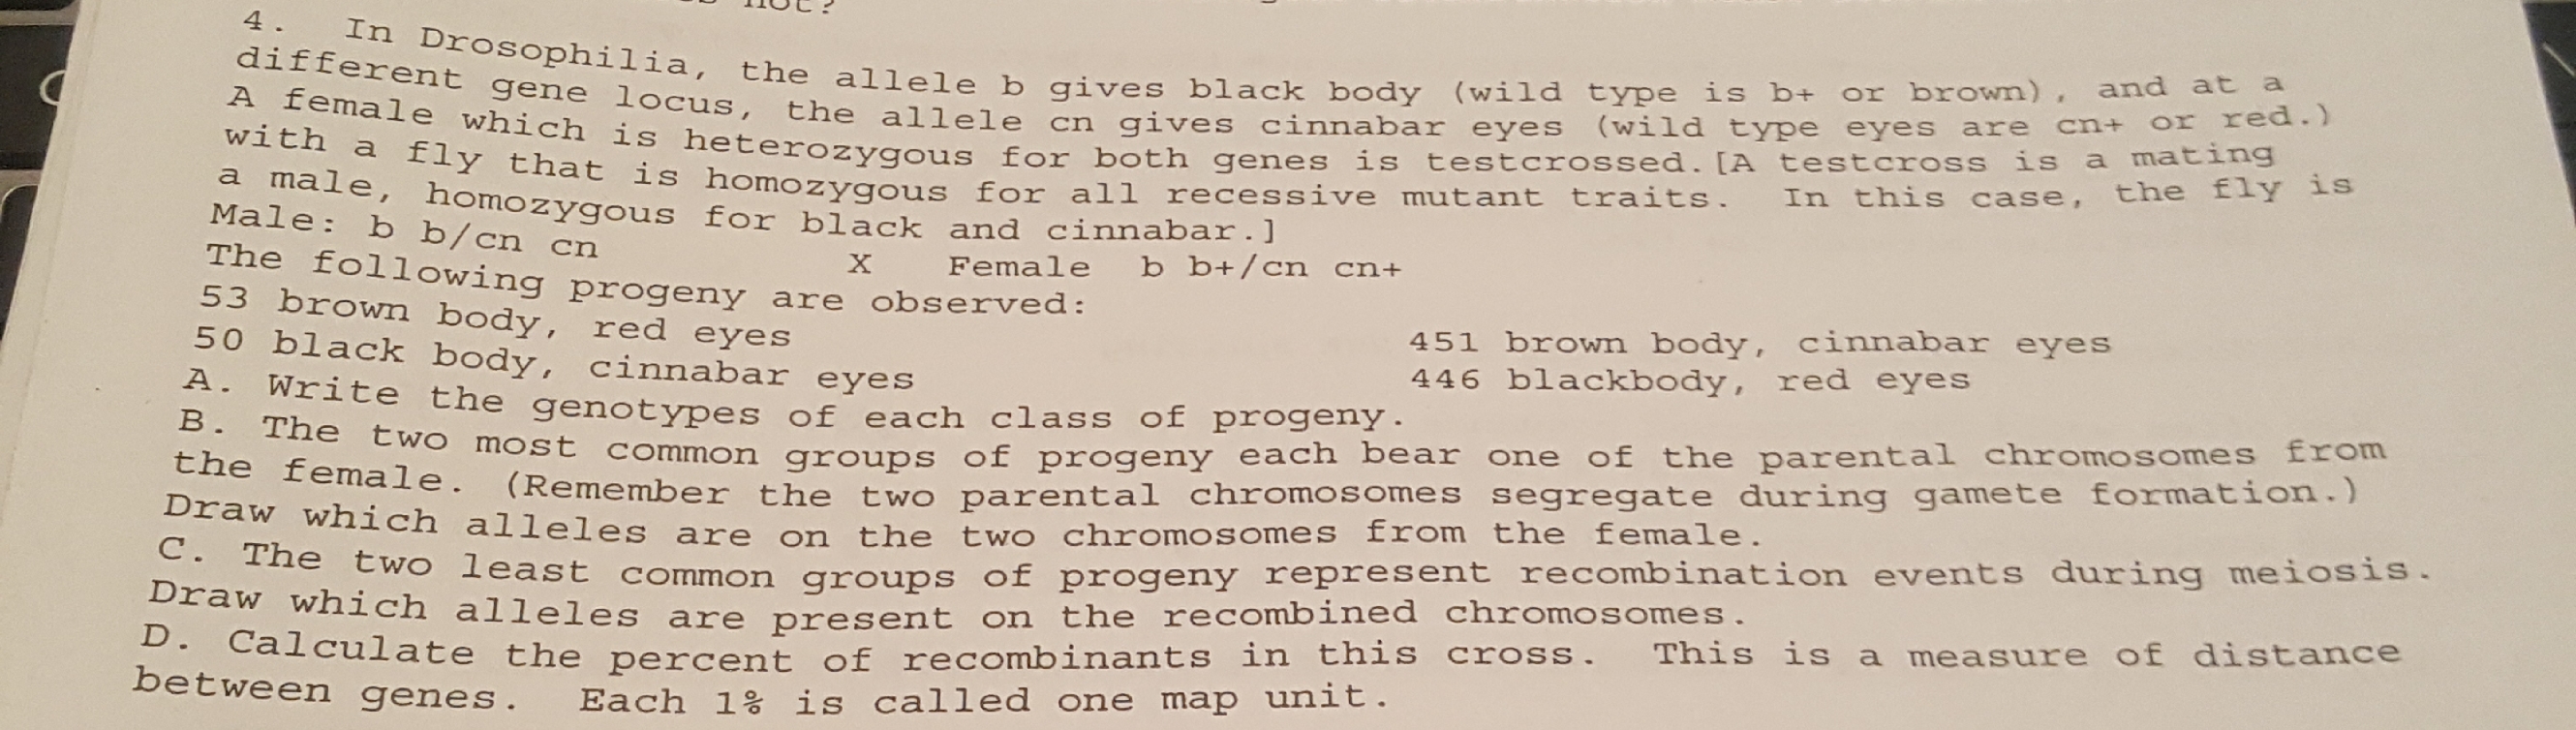 4. In Drosophilia, the allele b gives black body (wild type is b+ or brown), and at a
different gene locus, the allele cn gives cinnabar eyes (wild type eyes are cn+ or red.)
A female which is heterozygous for both genes is testcrossed. [A testcross is a mating
ma ly that is homozvgous for all recessive mutant traits.
a male, homozygous for black and cinnabar.J
Male: b b/cn cn
In this case, the fly is
Female b b+/cn cn+
The following progeny are observed:
53 brown body, red eyes
50 black body, cinnabar eyes
A. Write the genotypes of each class of progeny.
451 brown body, cinnabar eyes
446 blackbody, red eyes
the fomawo most common groups of progeny each bear one of the parental chromosomes from
Lemale. (Remember the two parental chromosomes segregate during gamete formation.)
on the two chromosomes from the female.
prane two least common groups of progeny represent recombination events during meiosis.
Draw which alleles are present on the recombined chromosomes.
D. Calculate the percent of recombinants in this cross.
between genes.
Draw which alleles are
This is a measure of distance
Each 1% is called one map unit.
